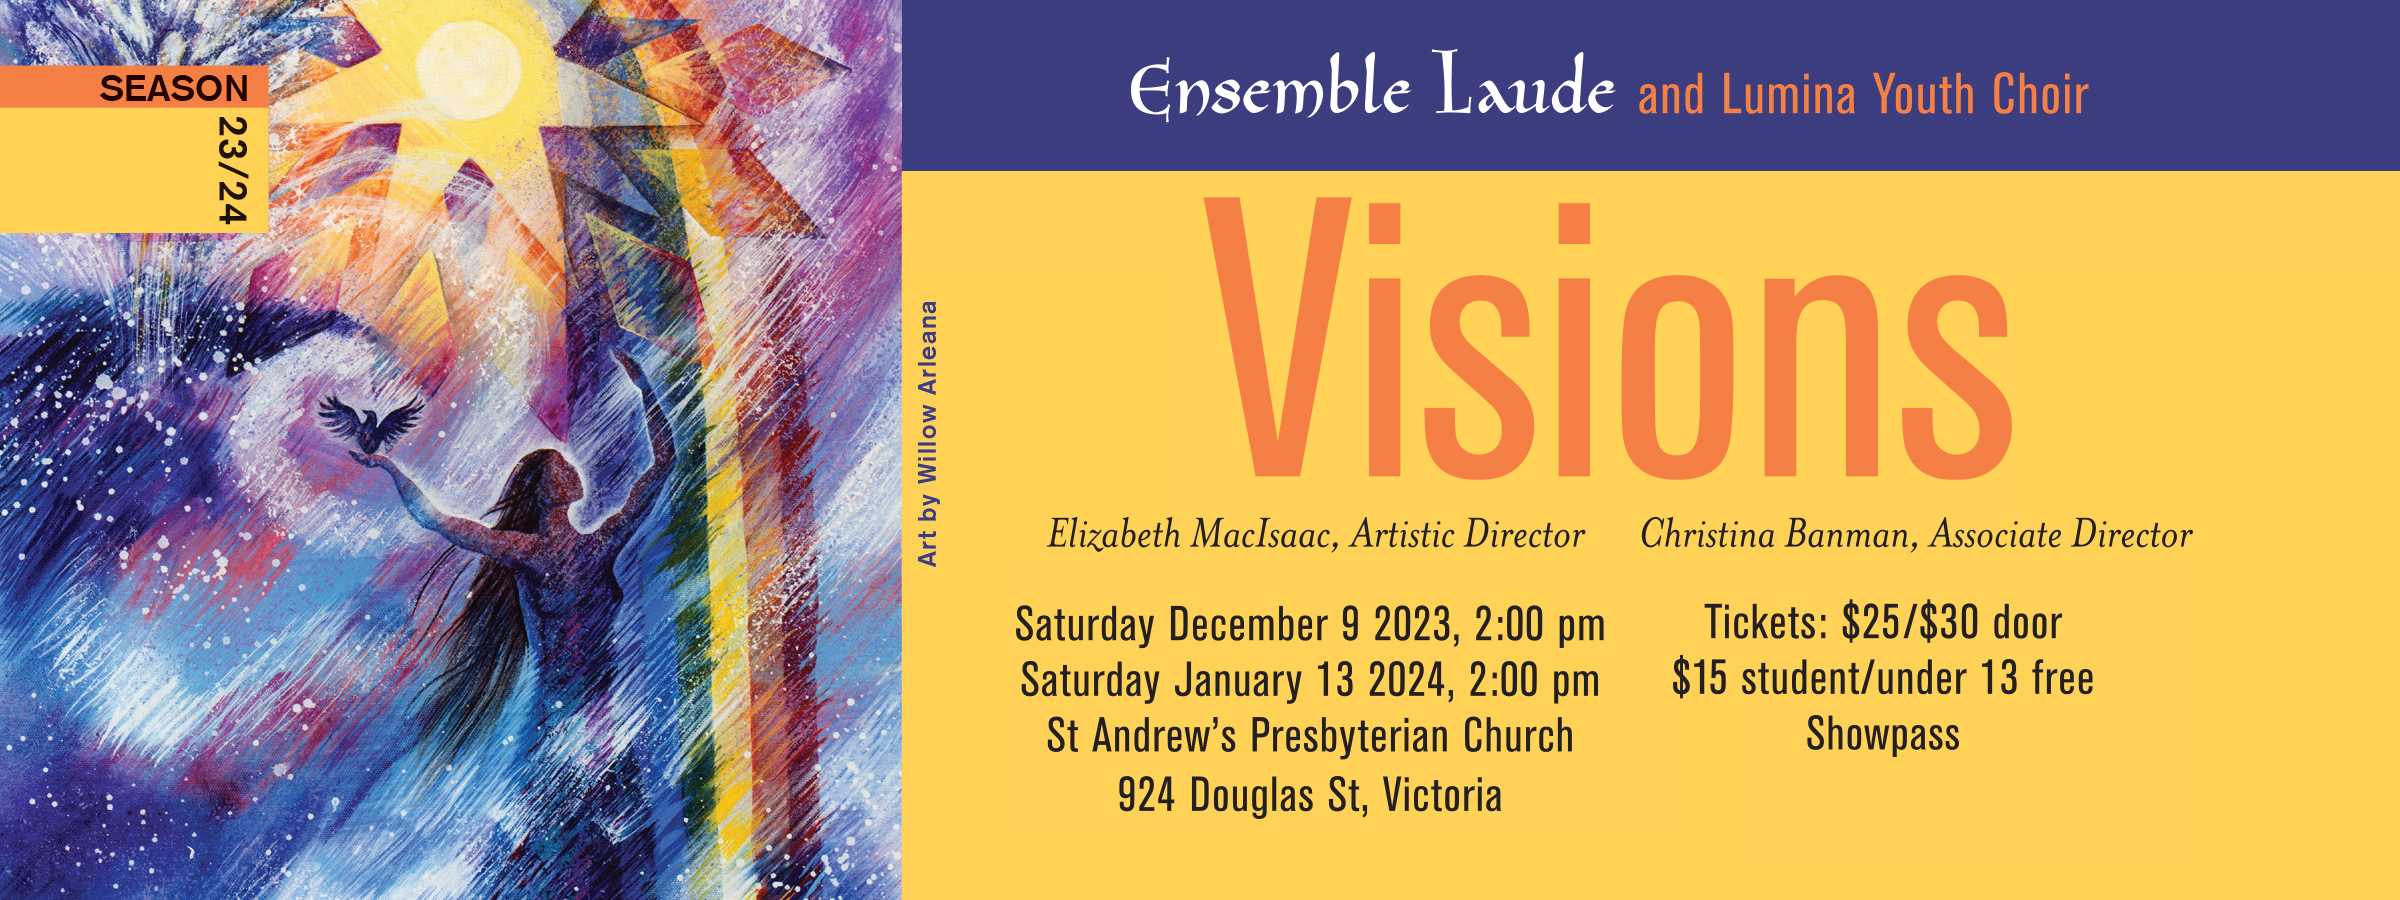 Banner image with information about the Ensemble Laude 